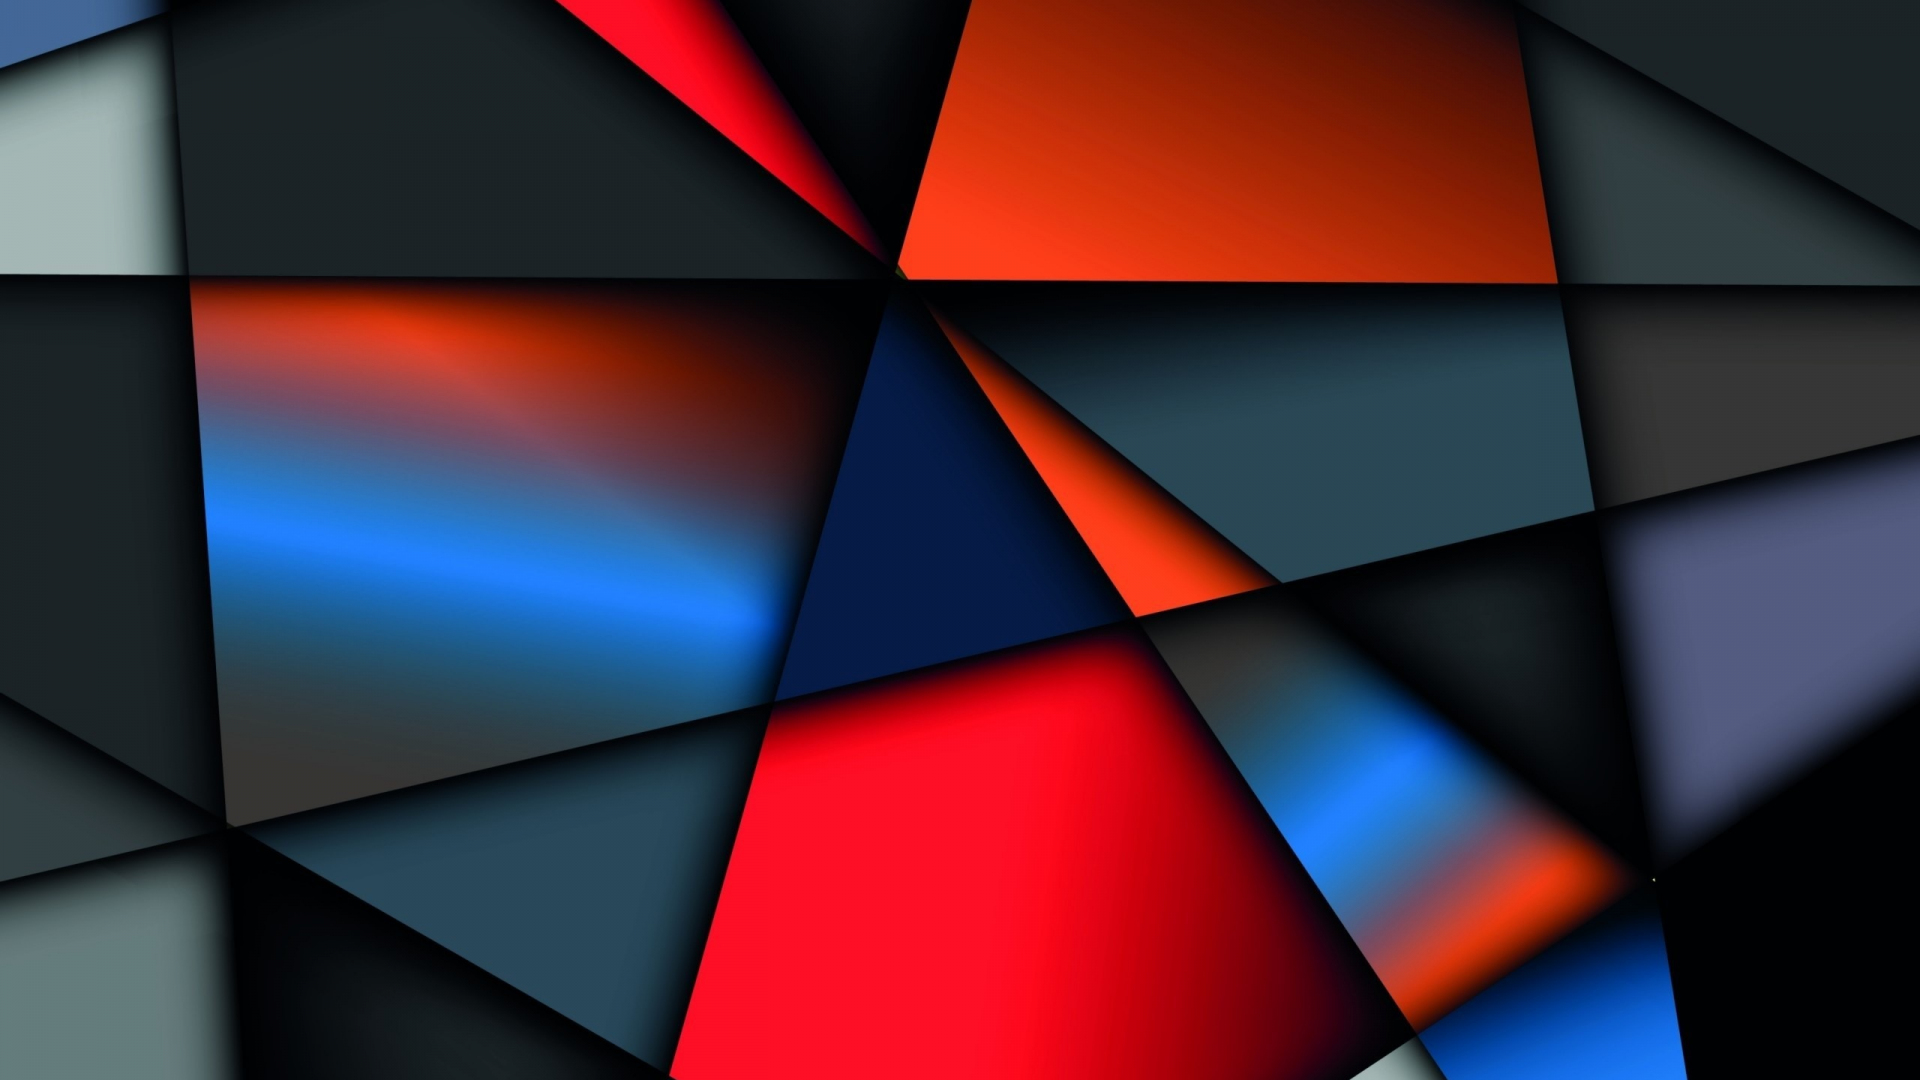 Download pattern, abstract, polygons, texture 1920x1080 wallpaper, full